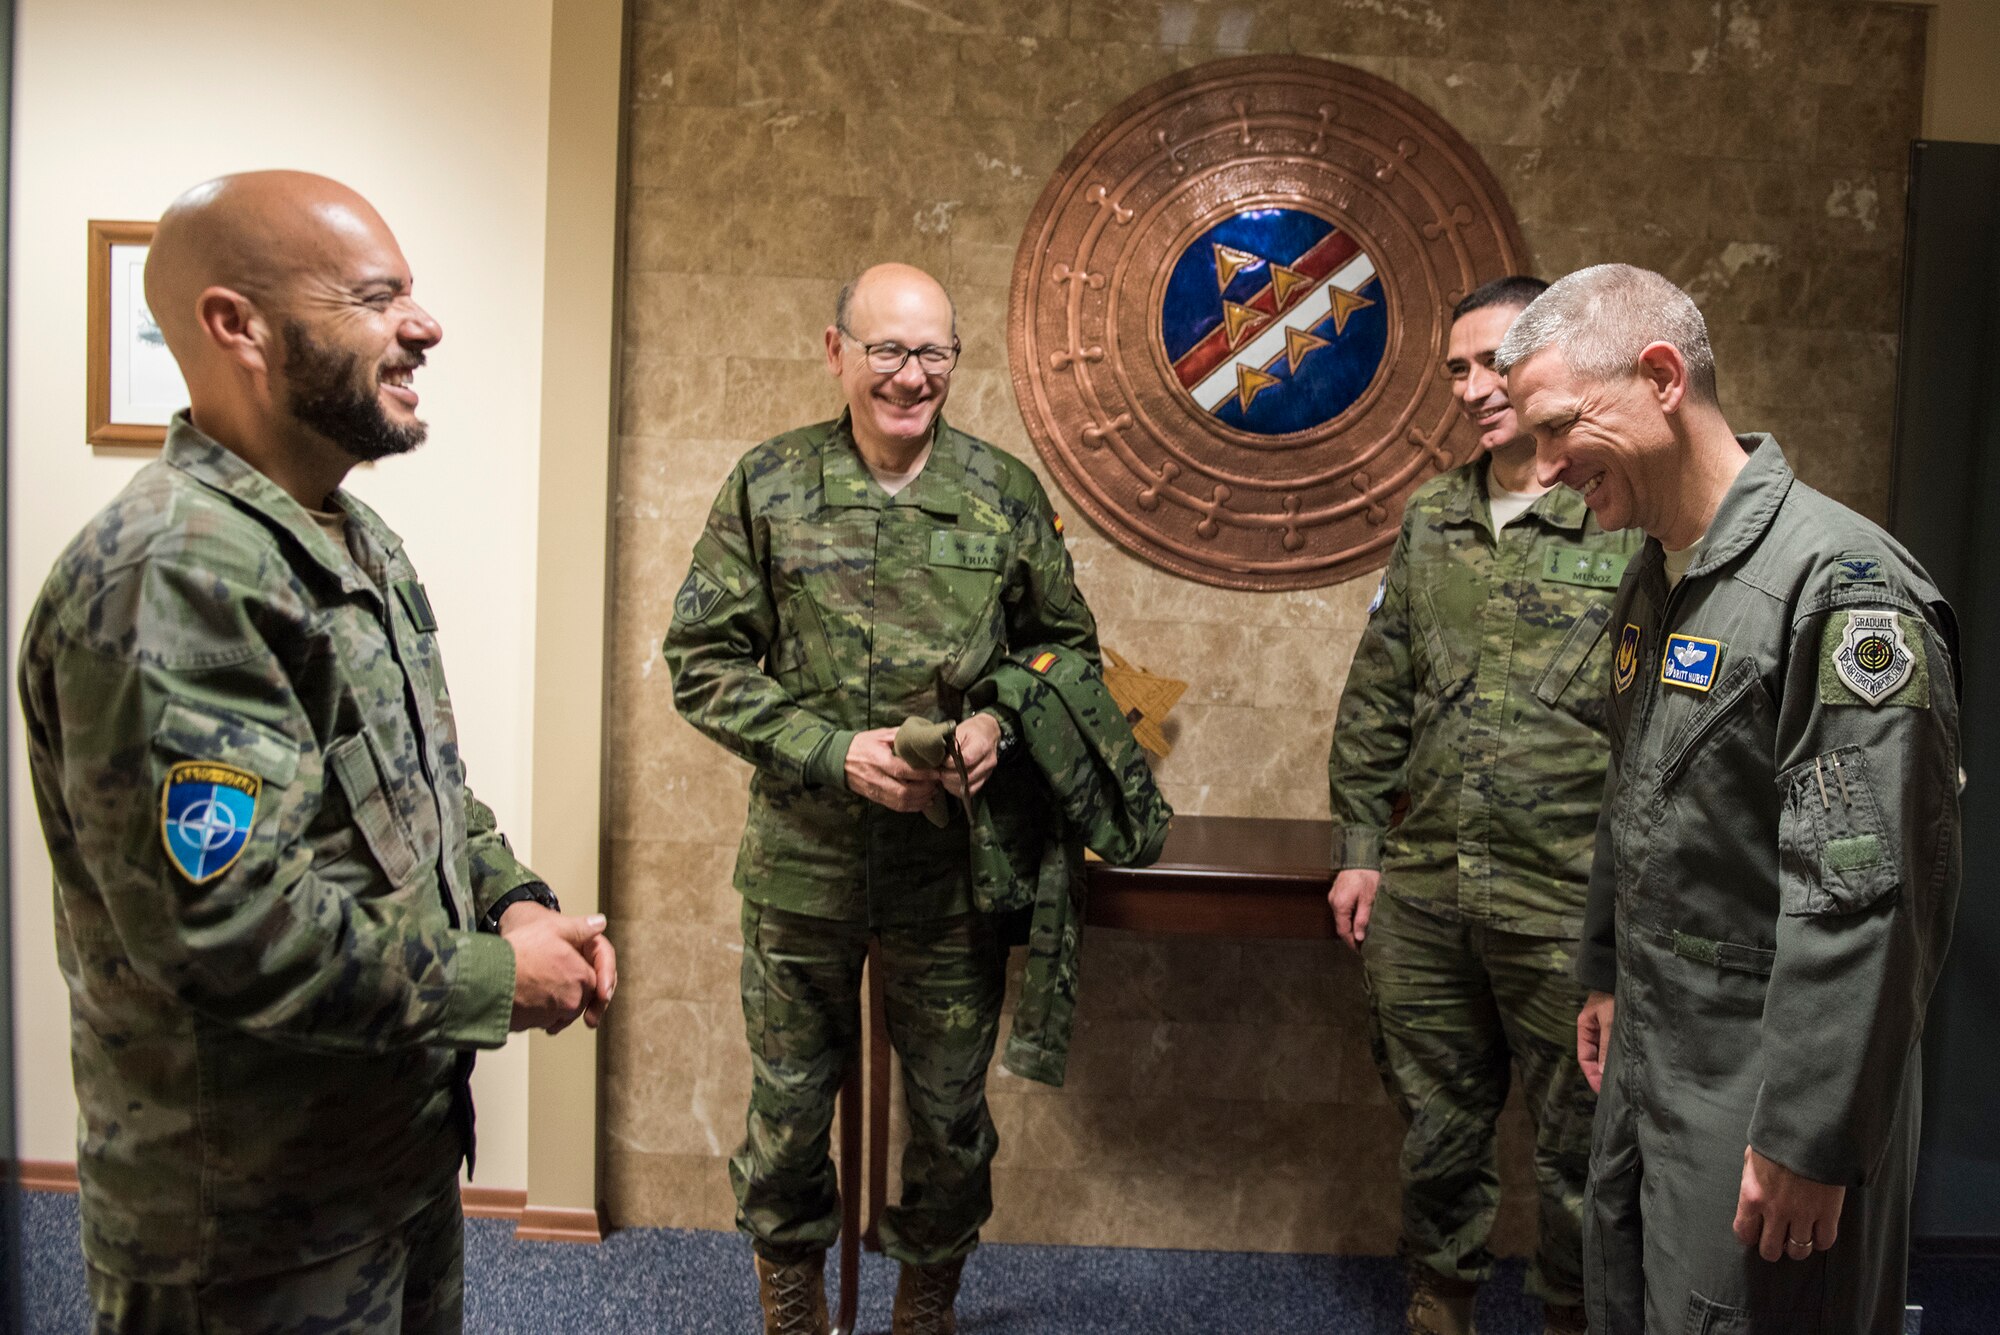 U.S. Air Force Col. Britt Hurst, 39th Air Base Wing commander, talks with leadership from the Spanish army at Incirlik Air Base, Turkey, Jan. 16, 2019.